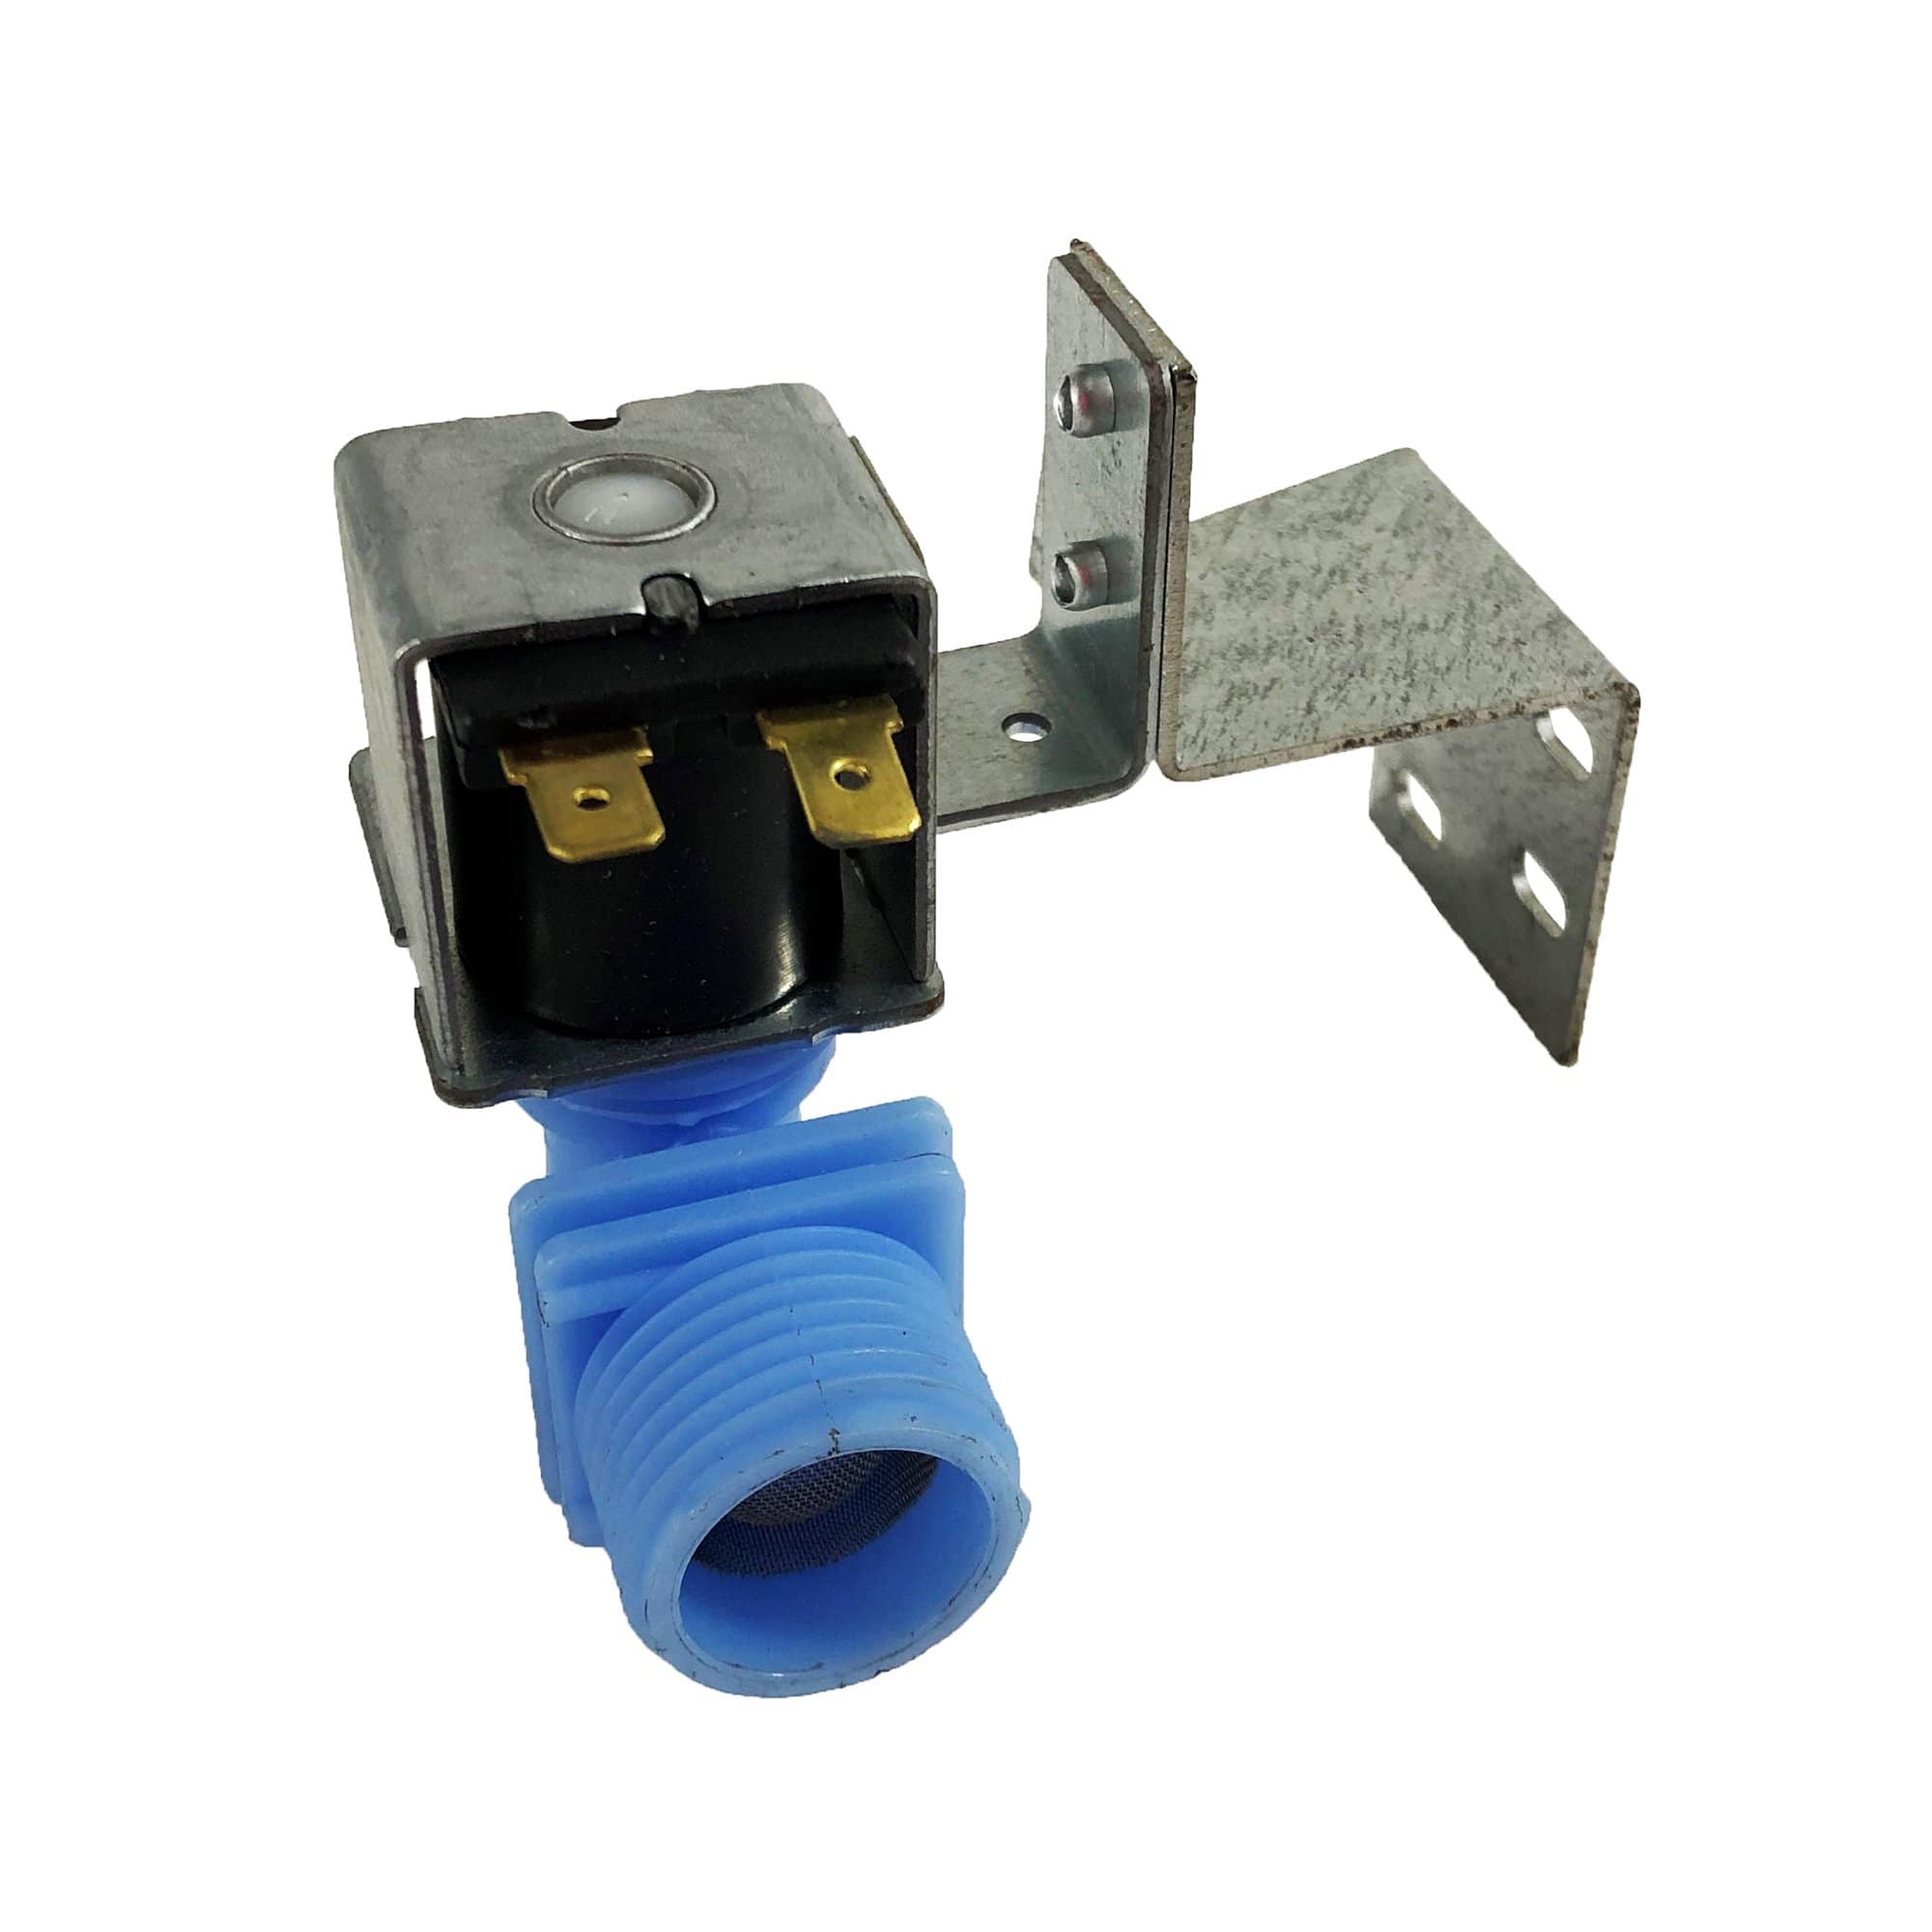 Anti-Siphon Valve, Removable, Plastic, Carded 